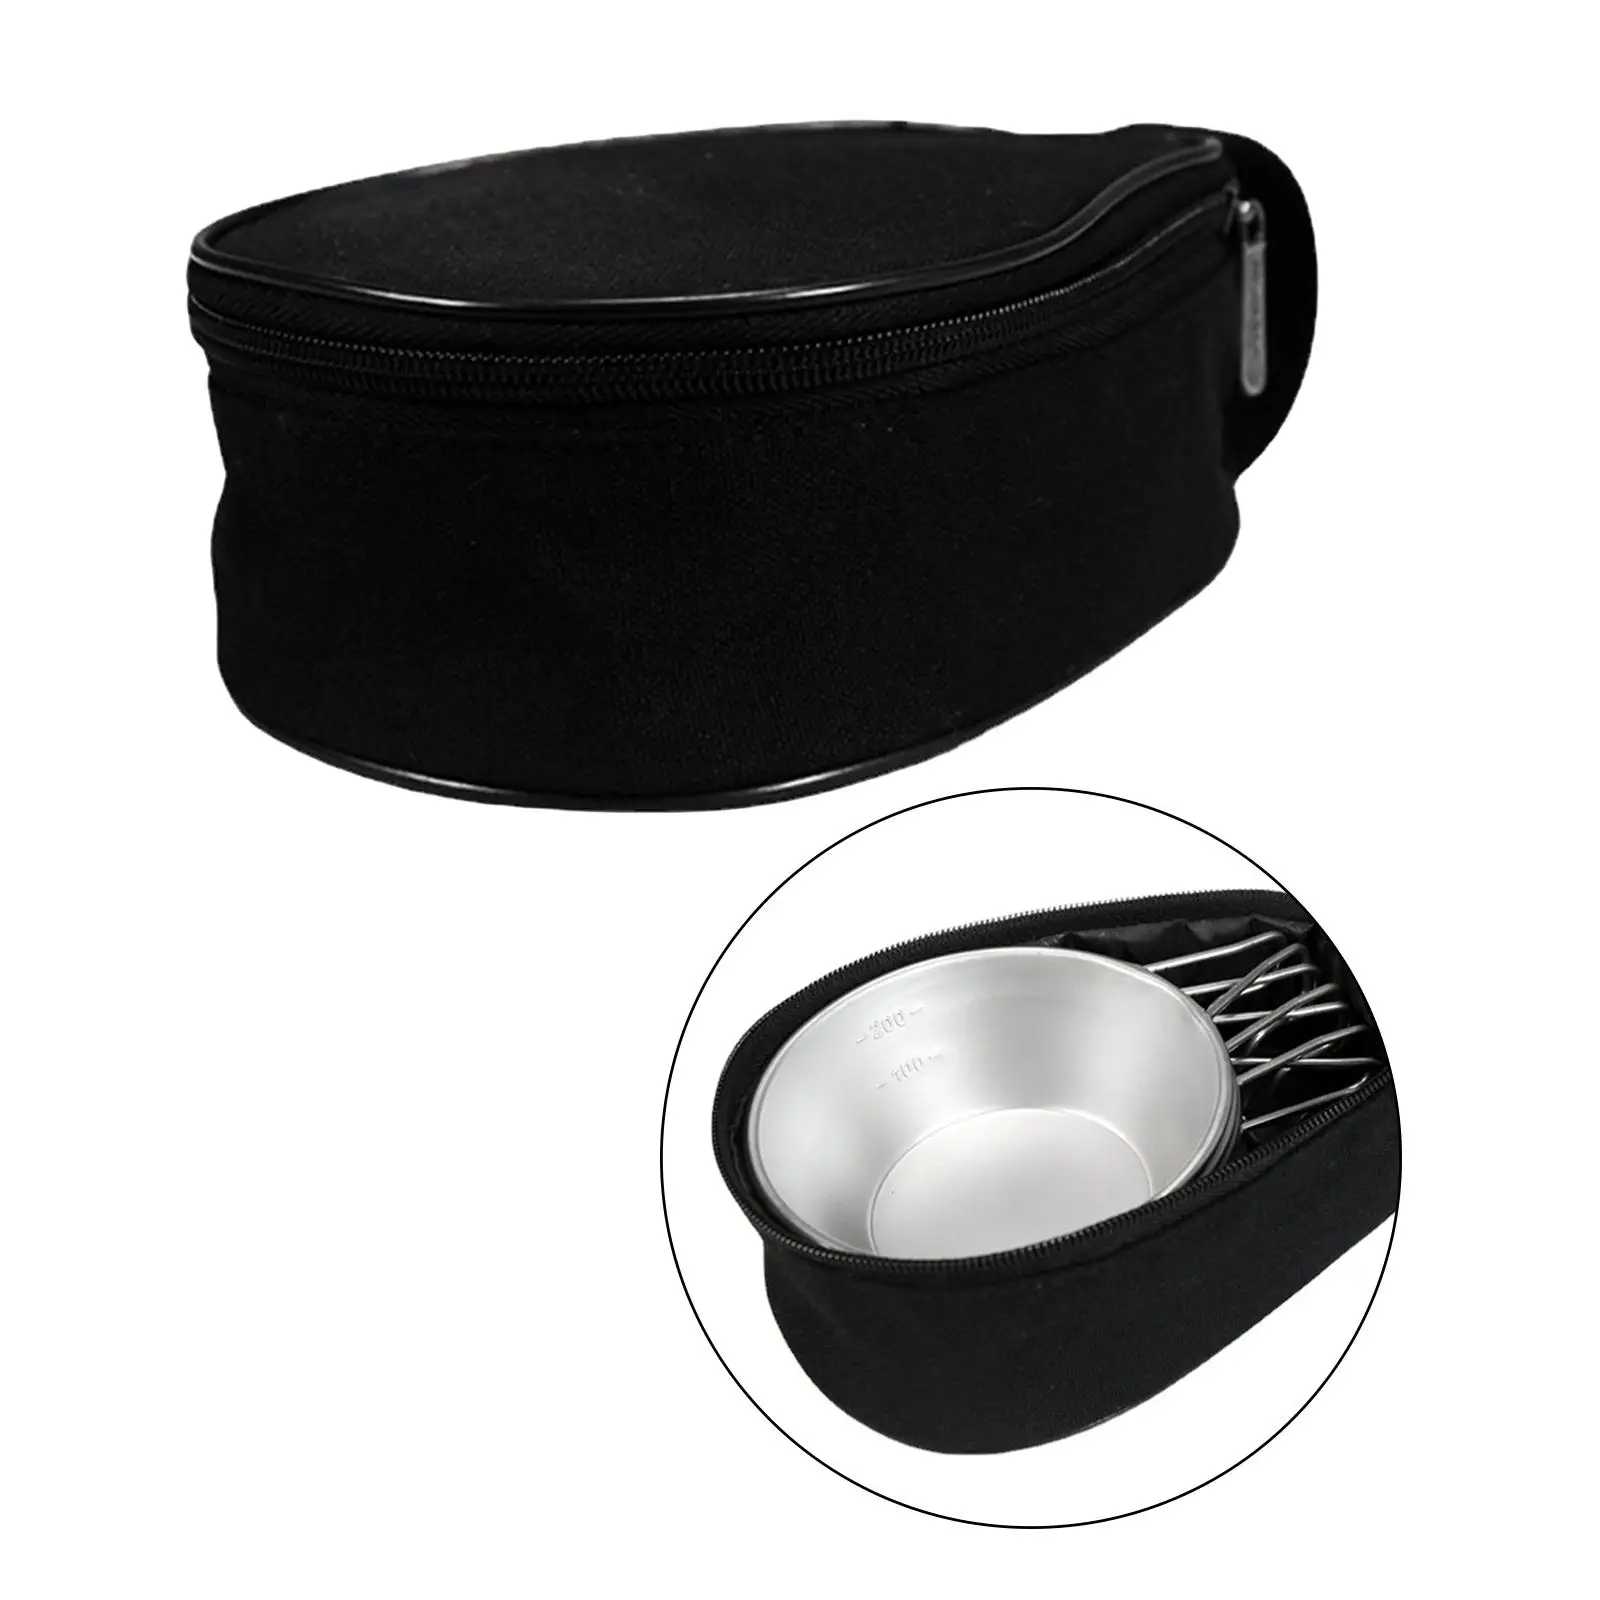 Tableware Bowl Bag Activities Holder Accessories Cutlery Cookware Case Carrier